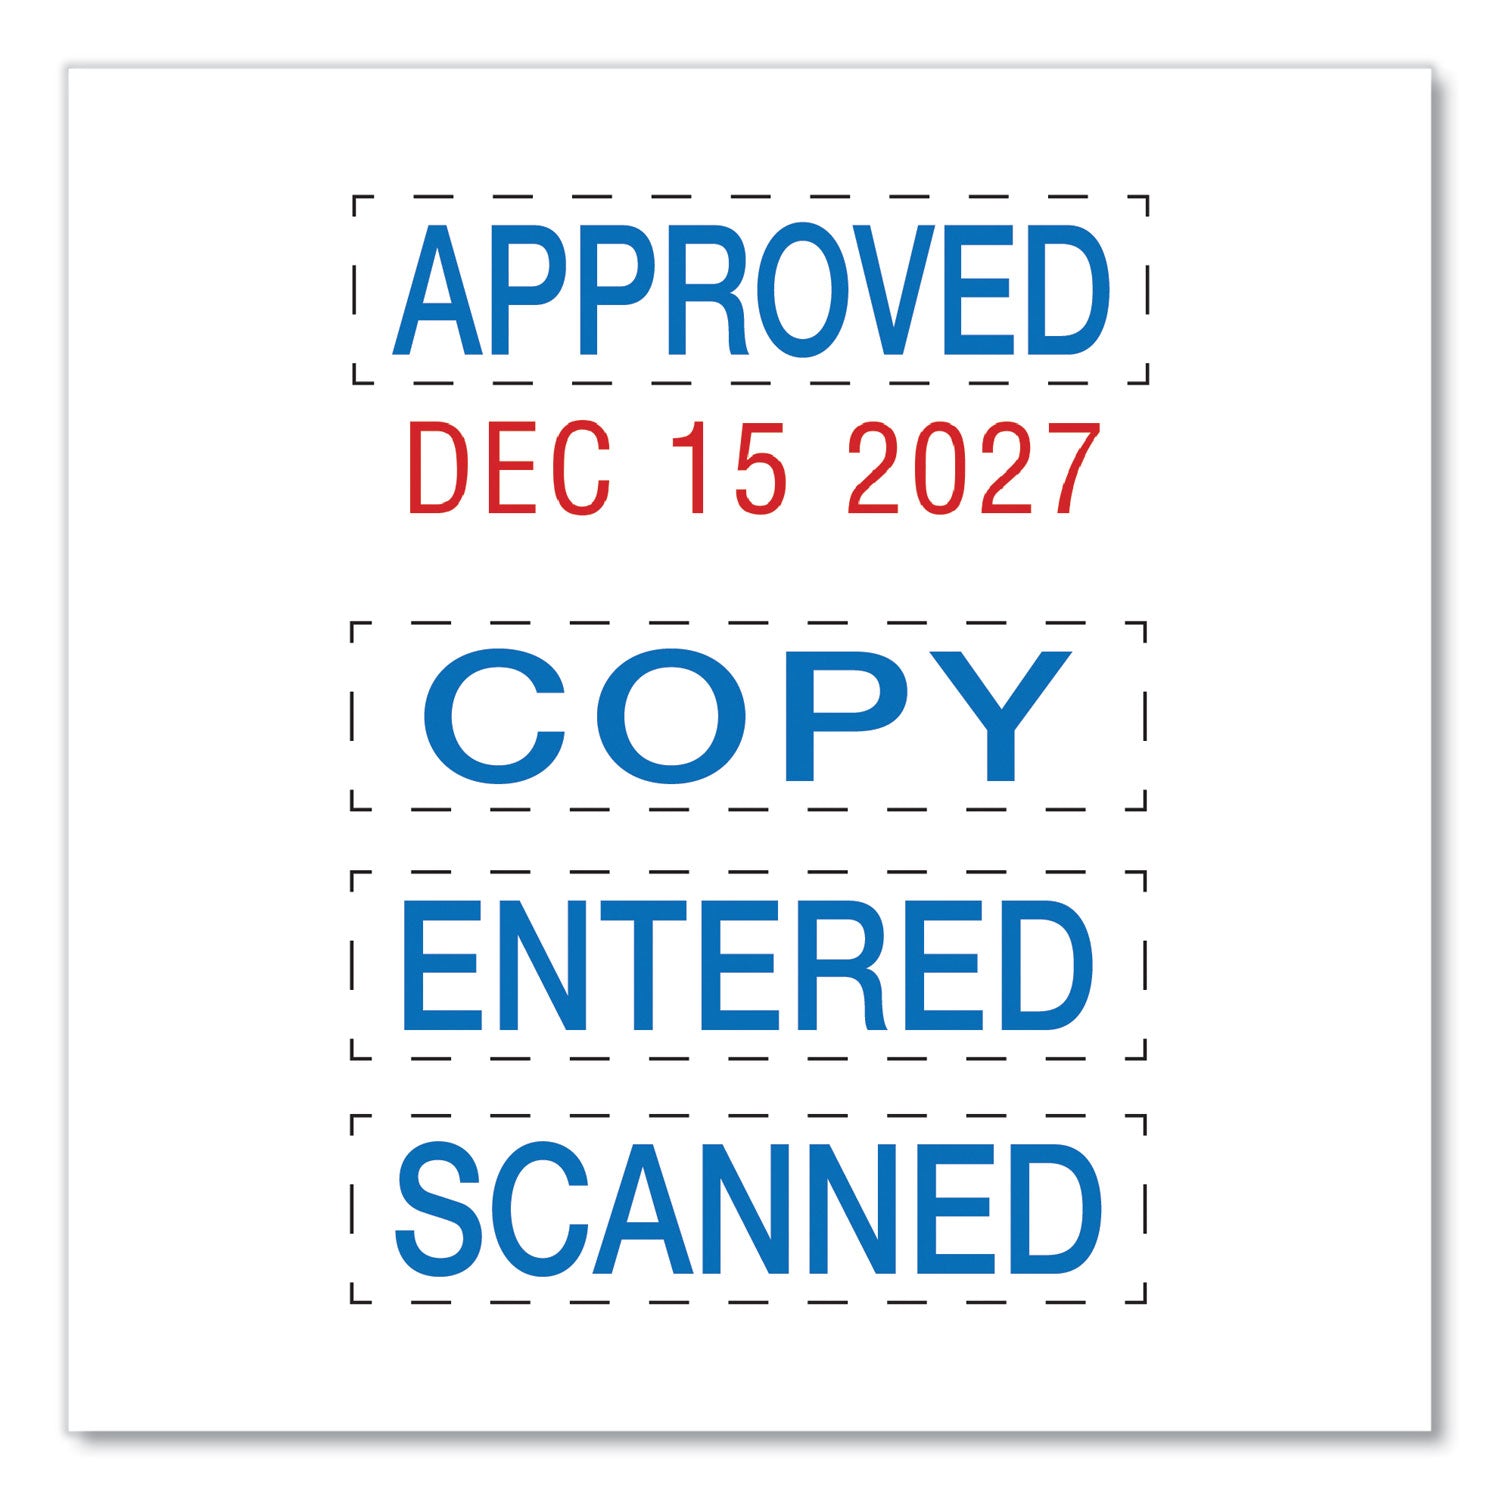 printy-economy-micro-5-in-1-date-stamp-self-inking-1-x-075-blue-red_usse4853l - 2